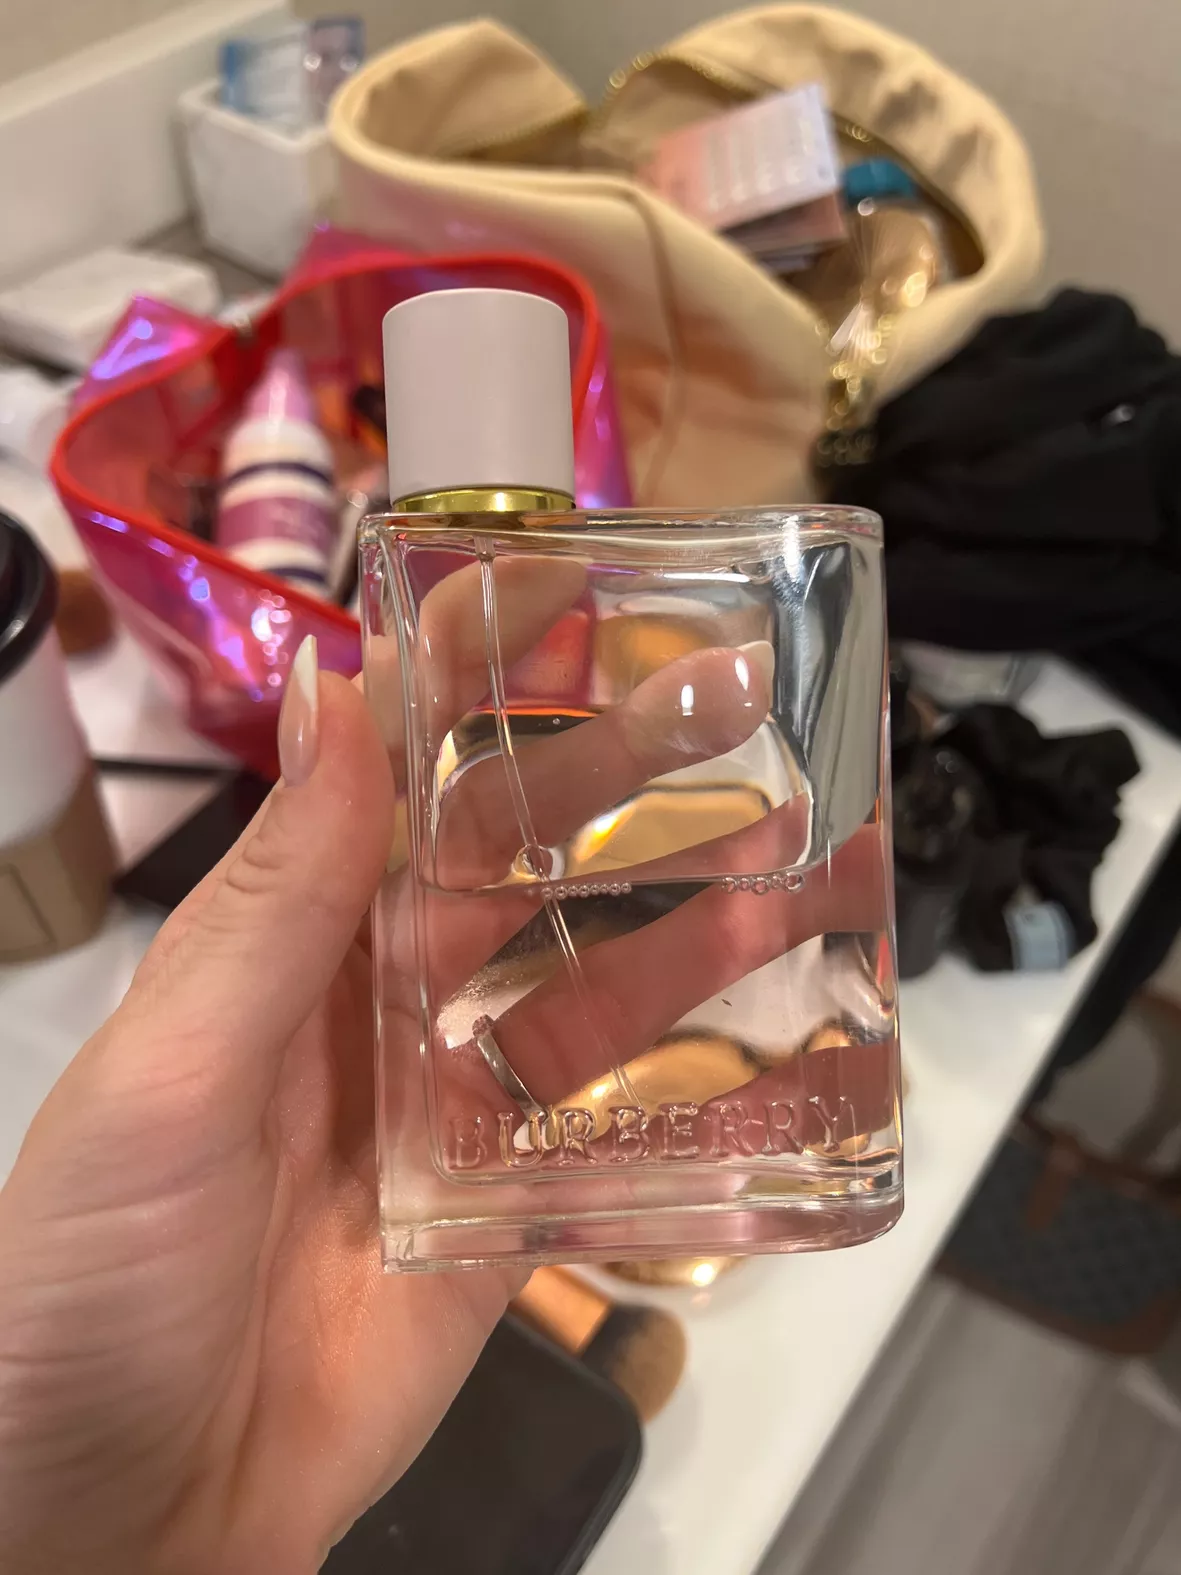 Burberry Touch 3.3 oz